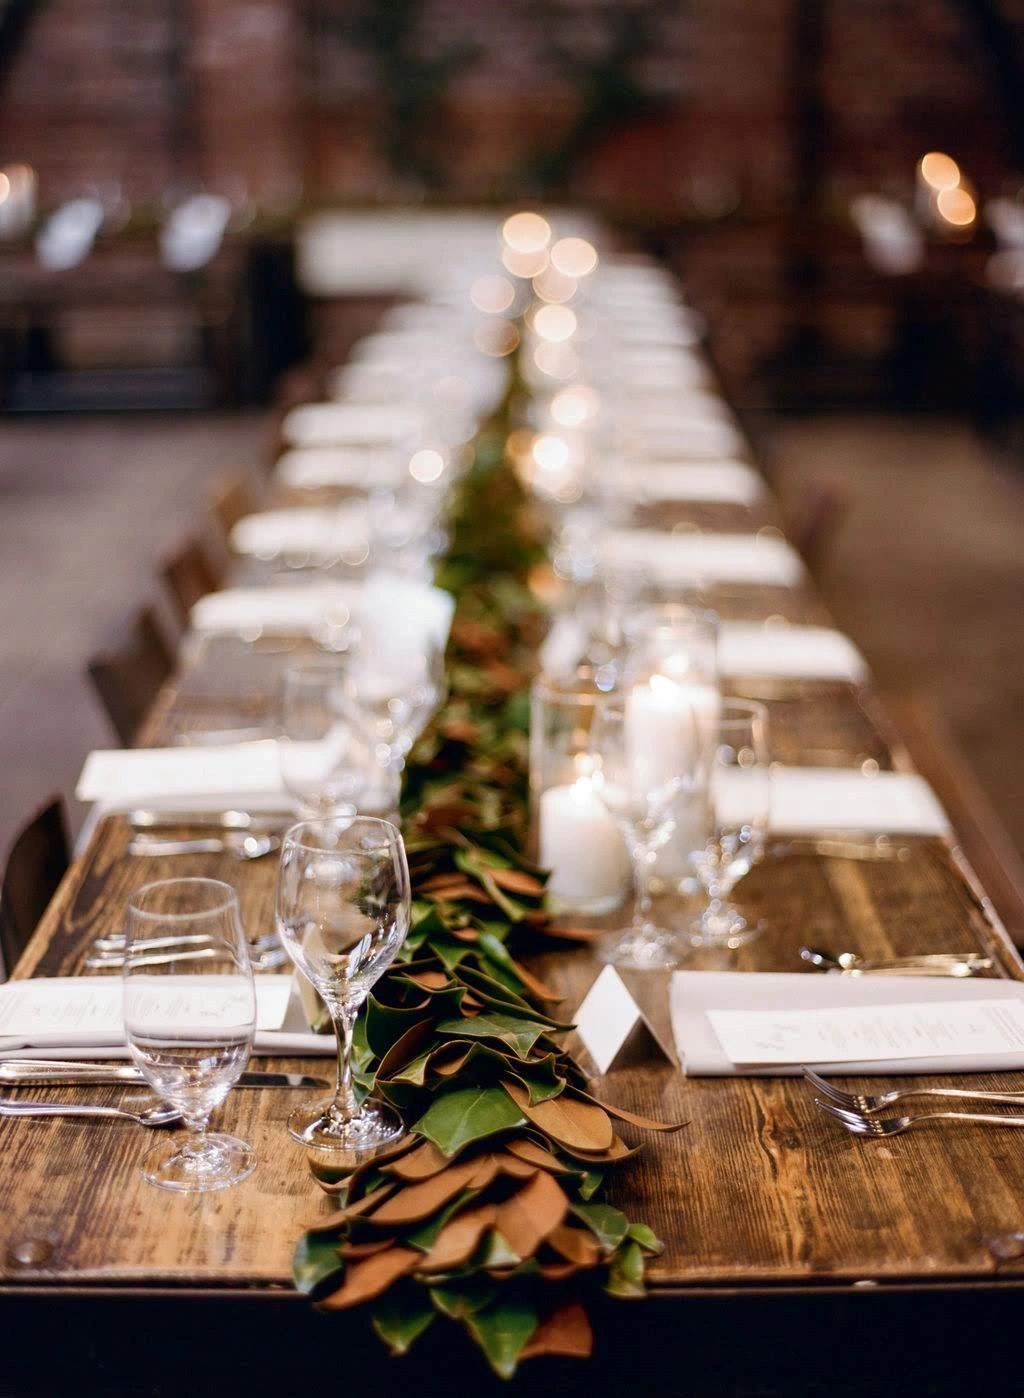 Overview of long table with leaf decor in the middle